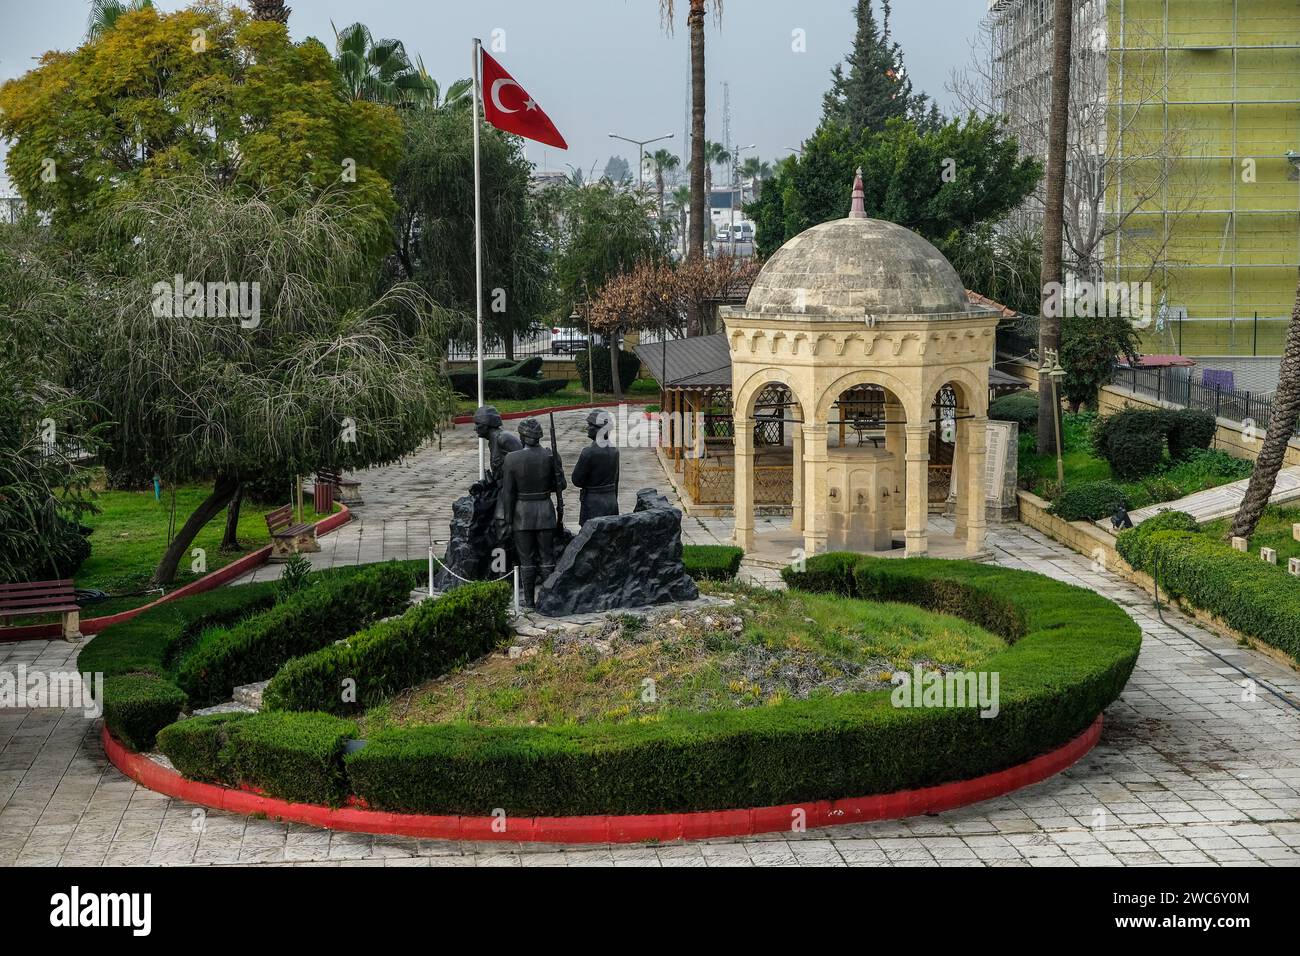 Nusret Mine Ship, the, which was of great use in the Çanakkale Victory, is exhibited in the park that bears its name in Tarsus. In the park, there are Stock Photo